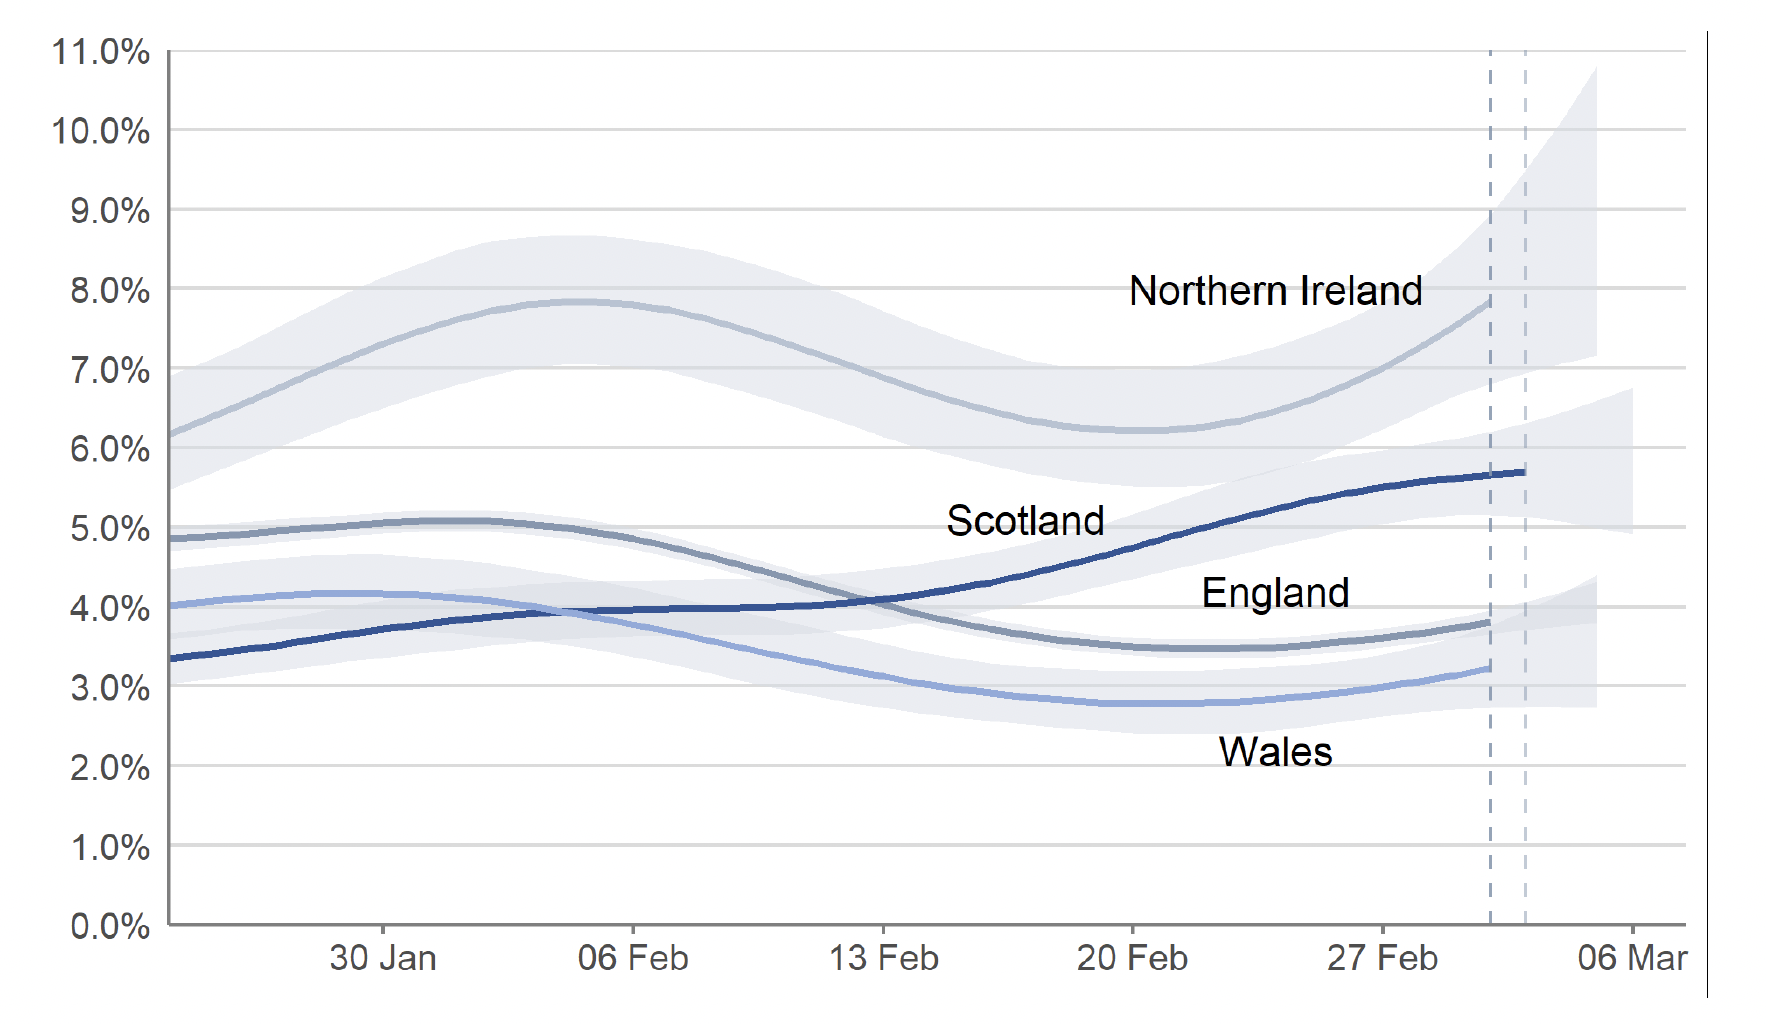 a line chart showing the modelled daily estimates of the percentage of the private residential population testing positive for Covid-19 in each of the four nations of the UK between 24 January and 5 March for England, Wales and Northern Ireland, and between 24 January and 6 March for Scotland, including 95% credible intervals. In the week 27 February to 5 March, the estimated percentage of people testing positive increased in England, Northern Ireland and Wales. In the week 28 February to 6 March, the estimated percentage of people testing positive continued to increase in Scotland.